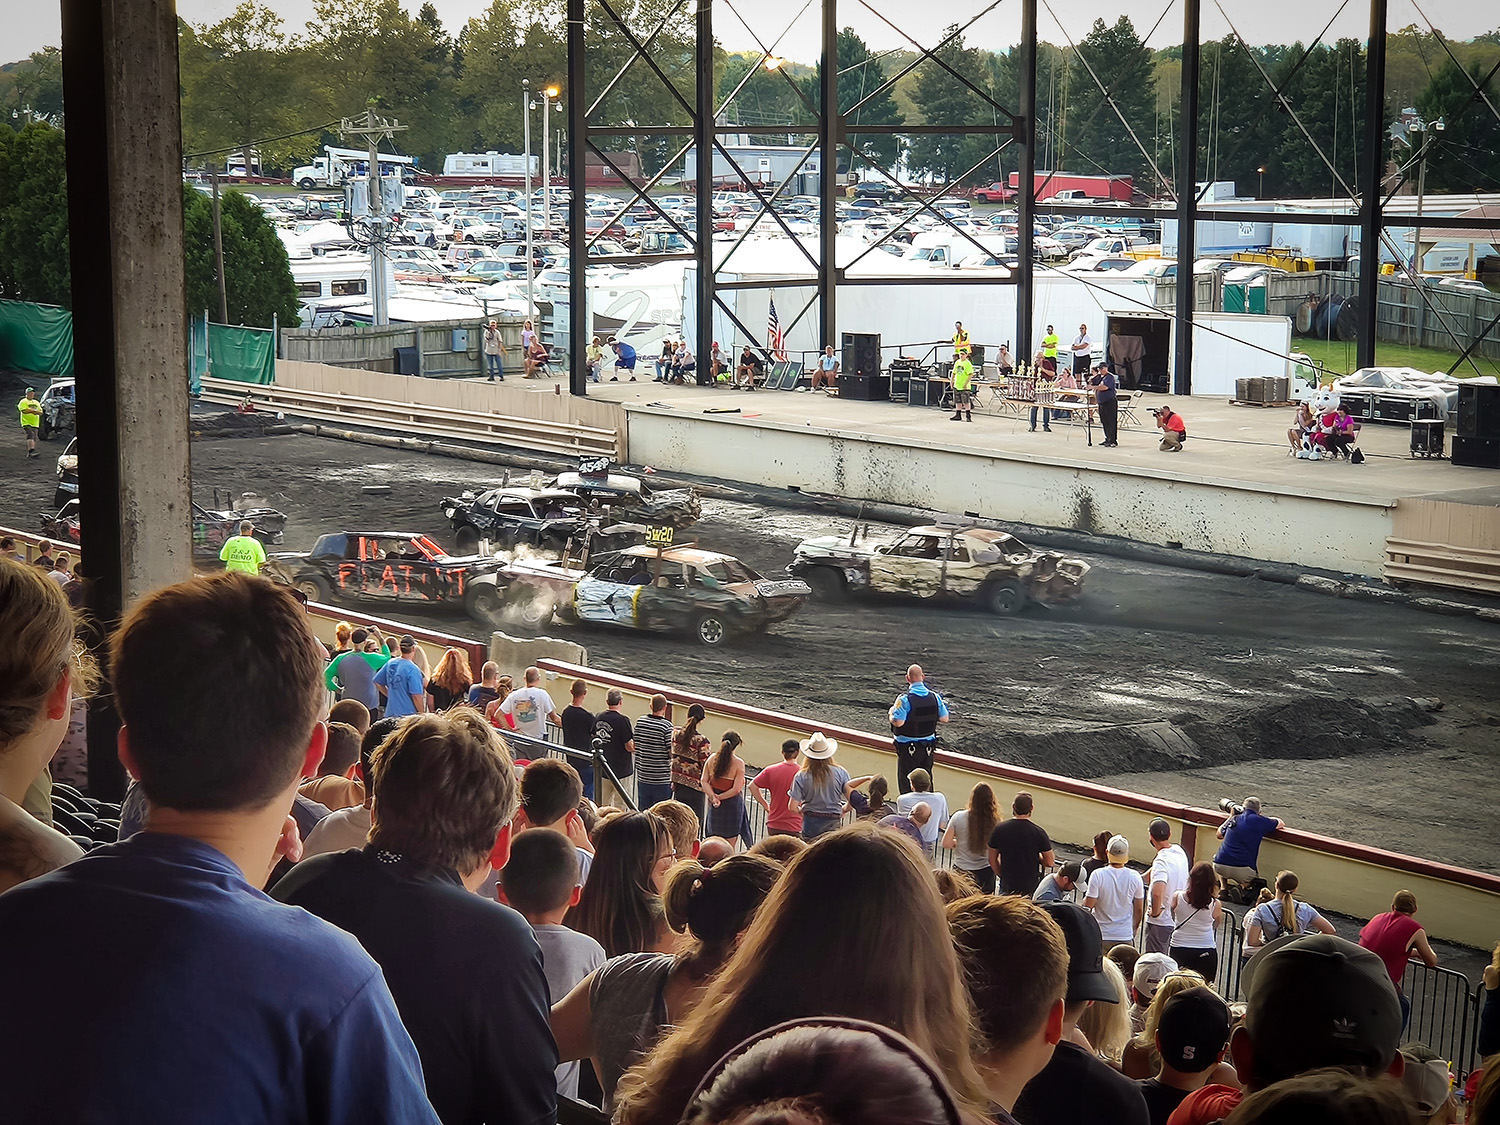 Junk car racing and crowd watching